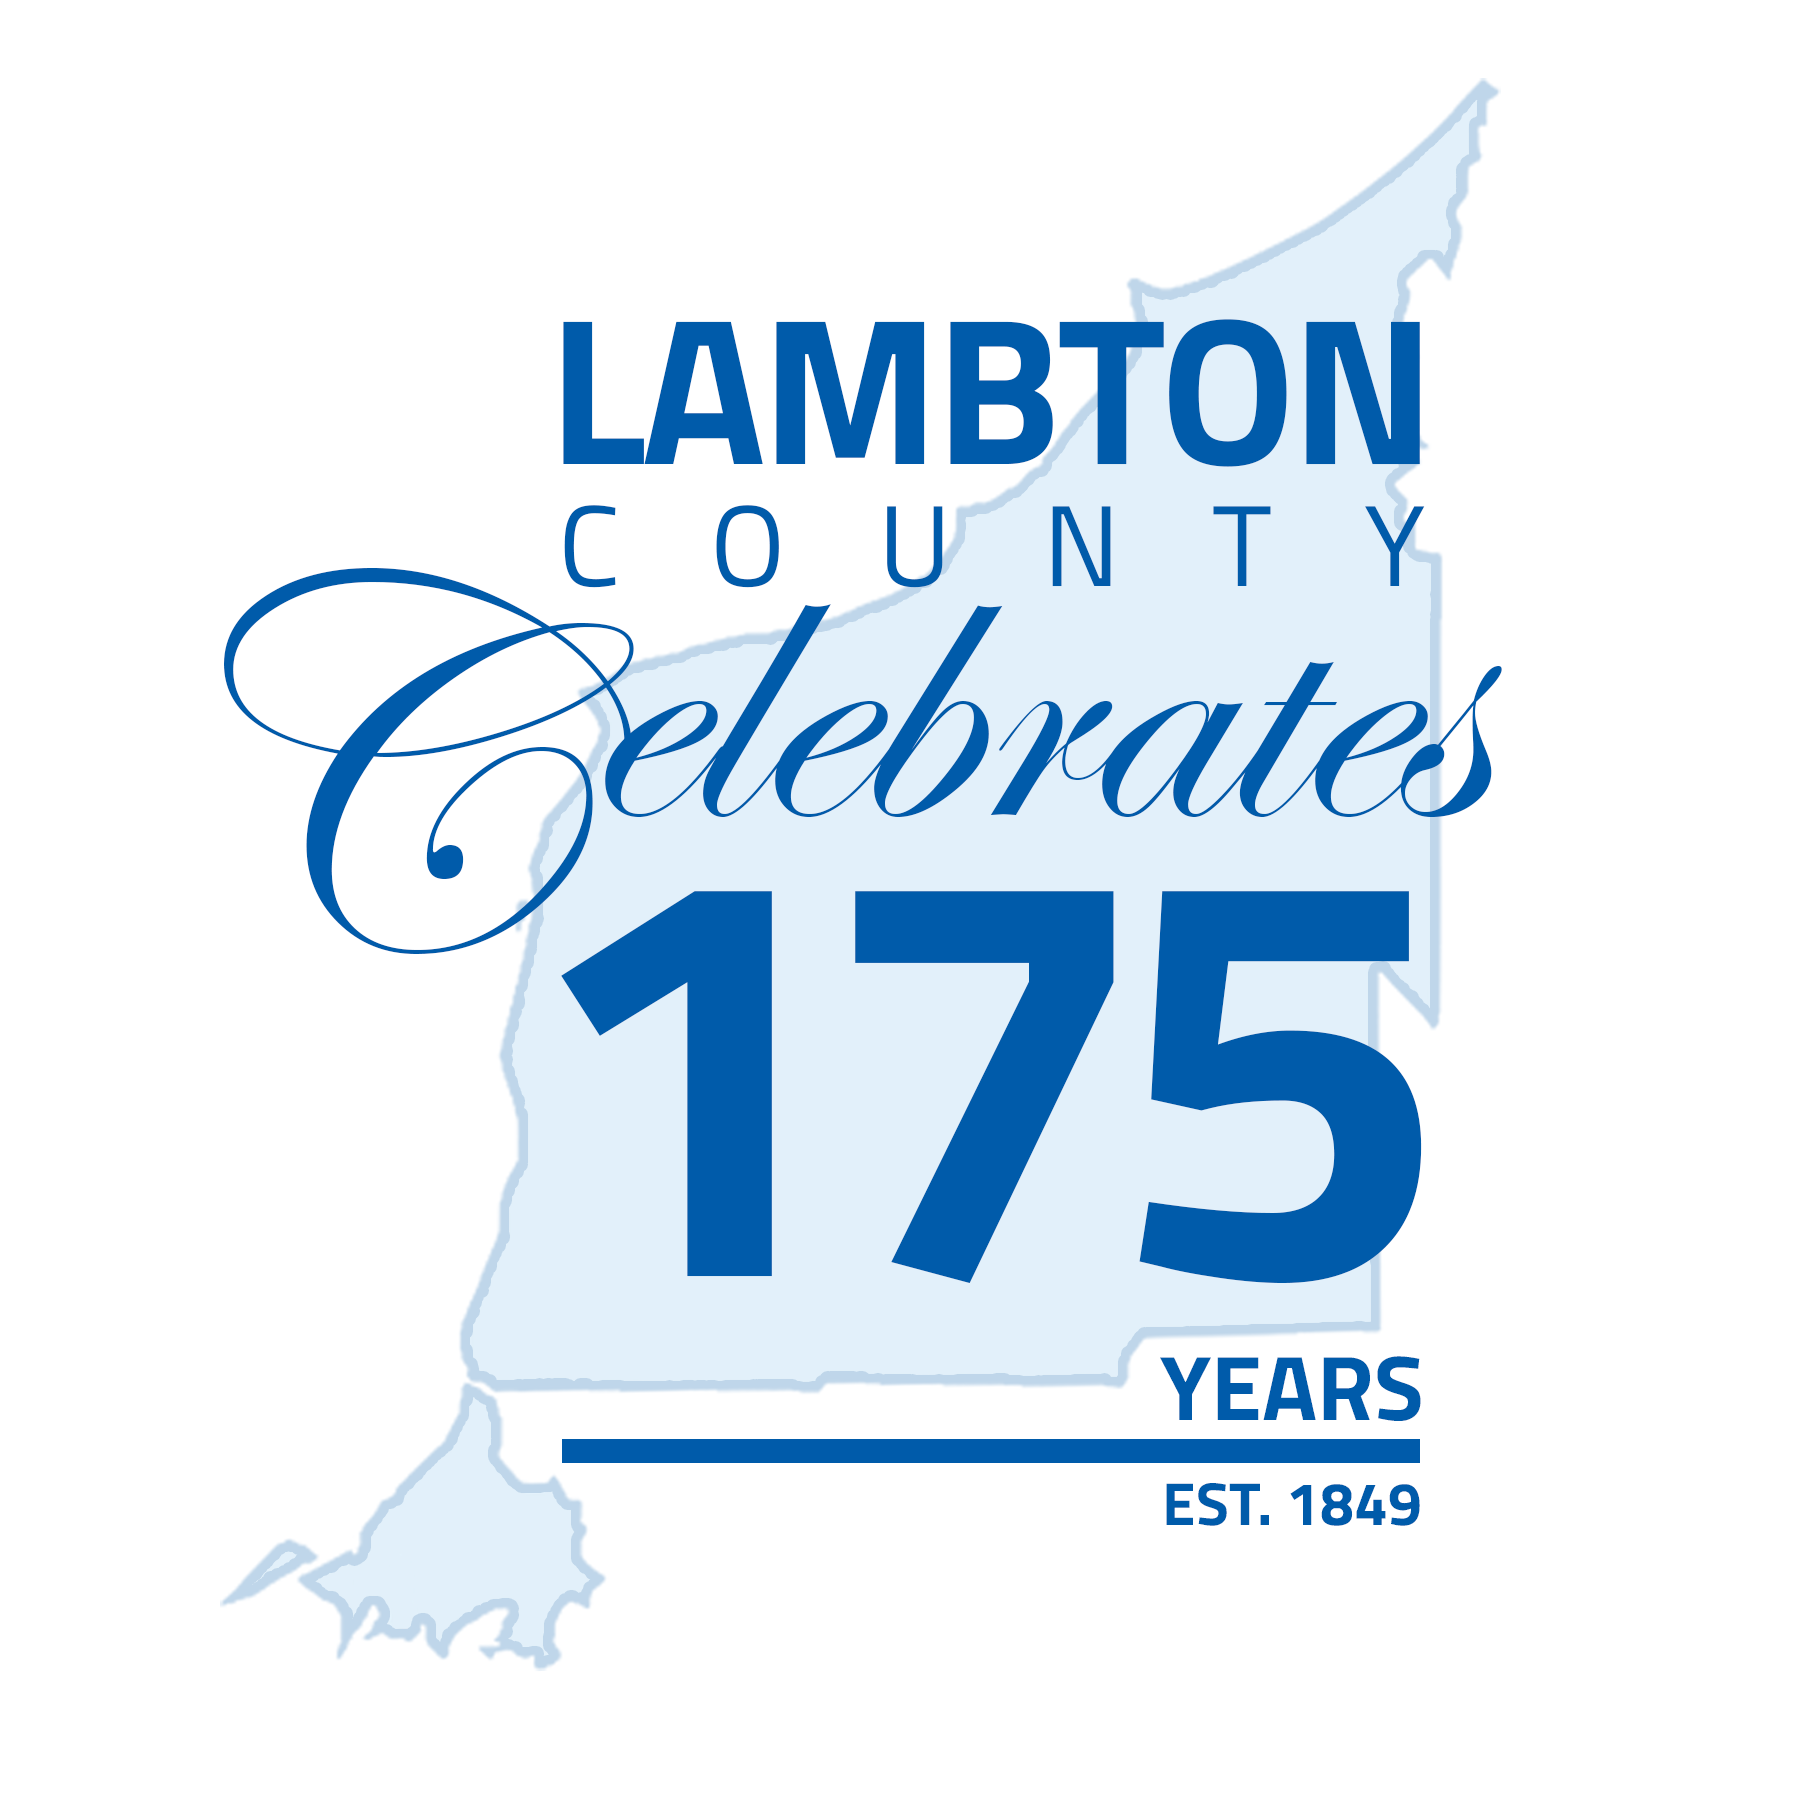 Logo with the map outline of Lambton County in light blue and dark blue text that says "Lambton County Celebrates 175 Years: est. 1849"